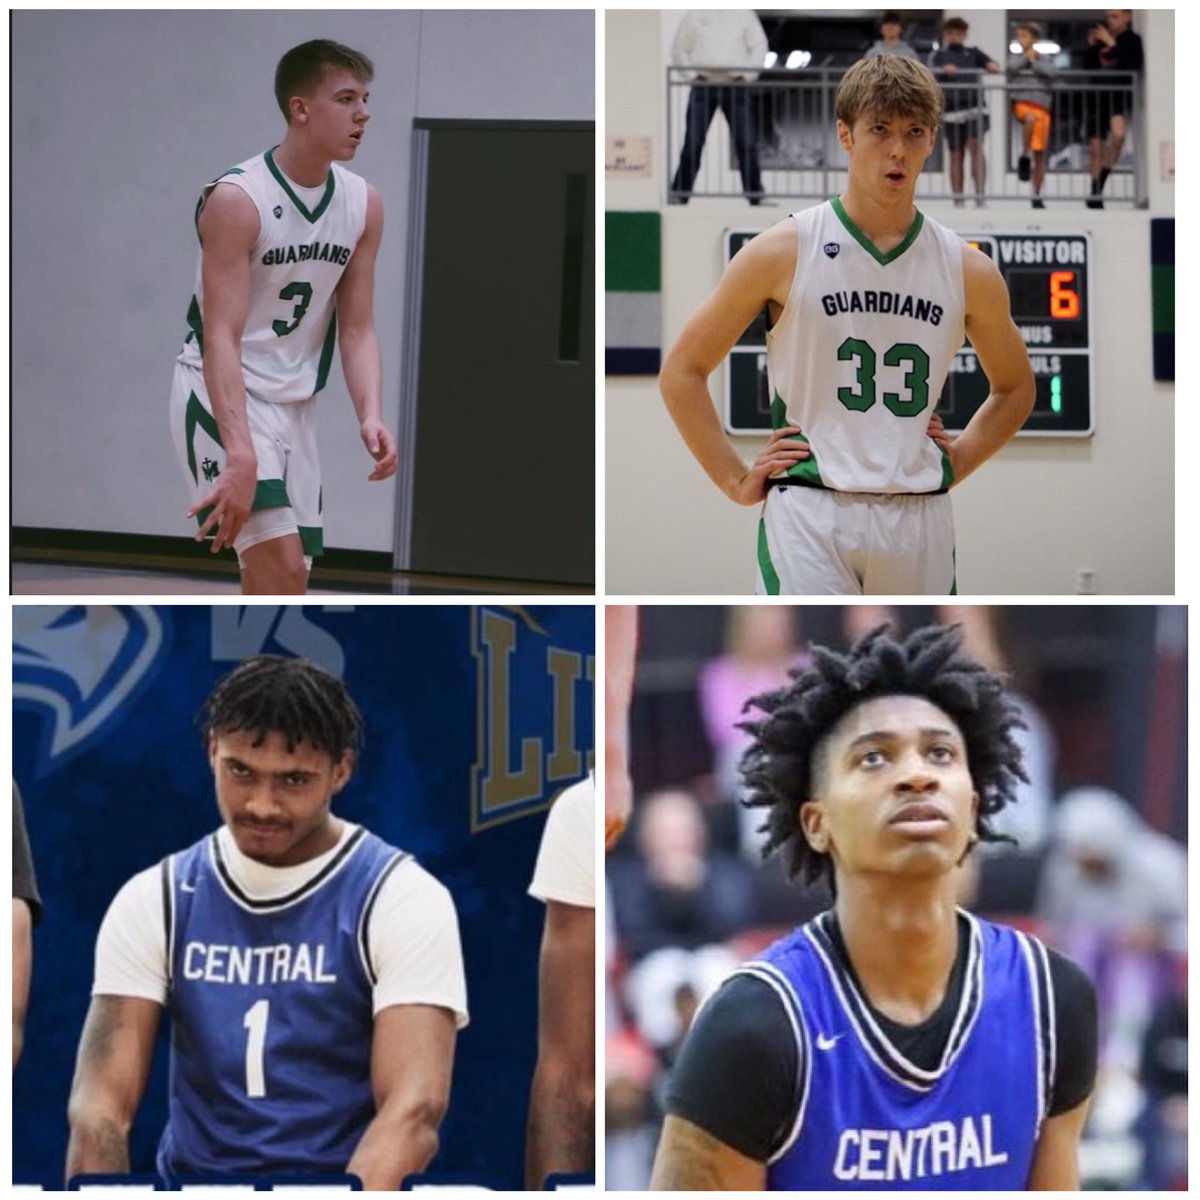 Top four players from the Pleasant Hill Tournament! 2024 Brandon Moore from Kc Central. Plays with intensity and athleticism. Can score the ball from all over the floor. Already has some offers. Averaging 22ppg on the season. 2026 Josh Wheeler from St Michael’s. He’s the point…